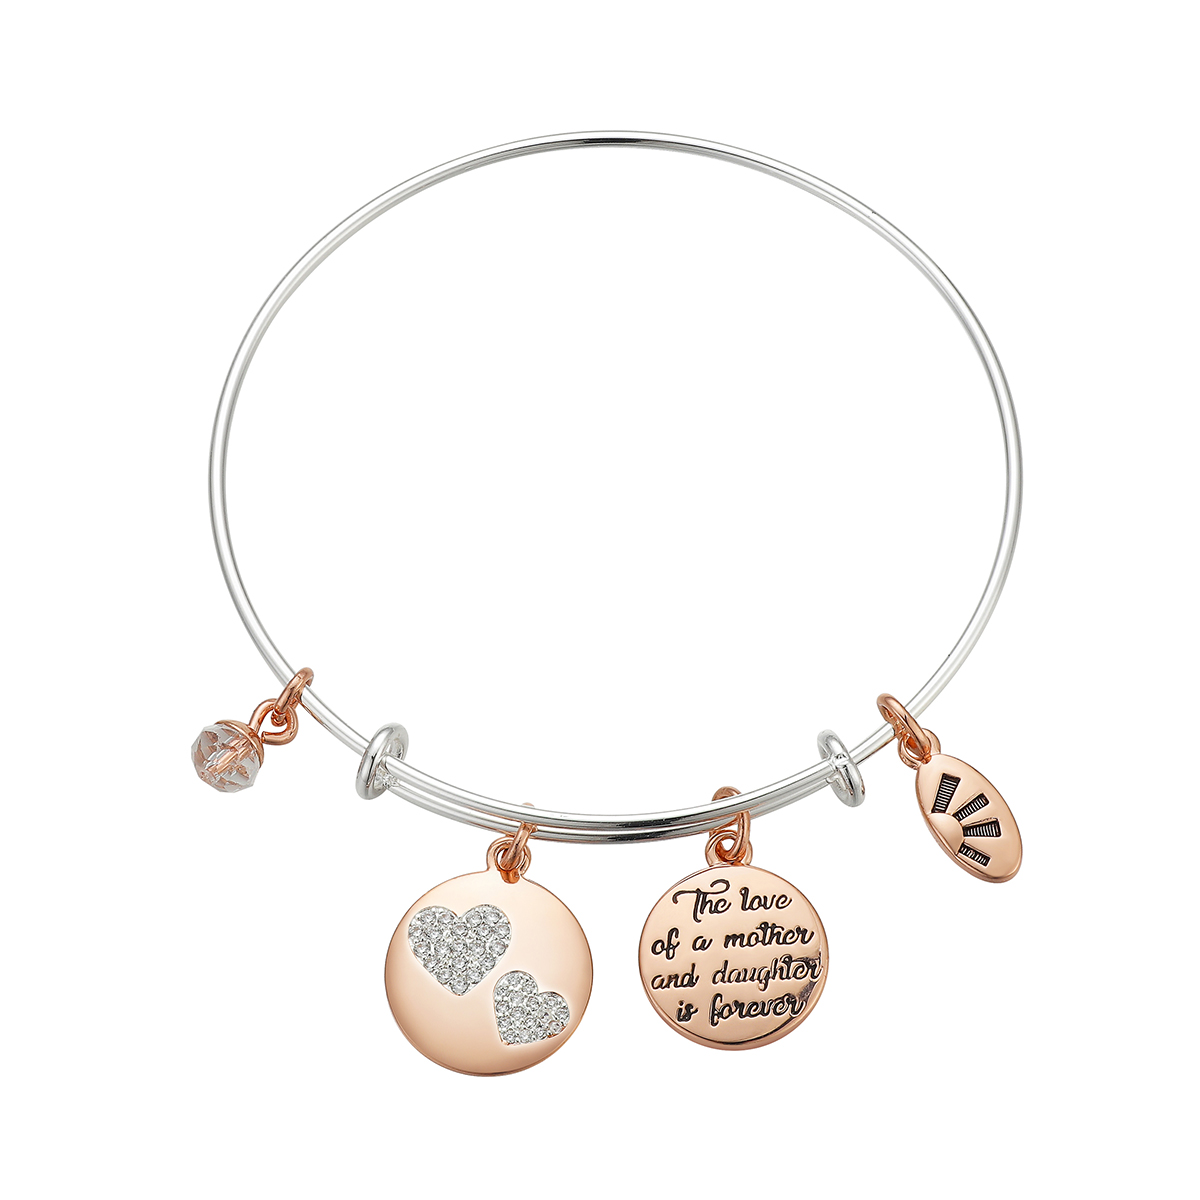 Shine The Love Of A Mother And Daughter Is Forever Bracelet